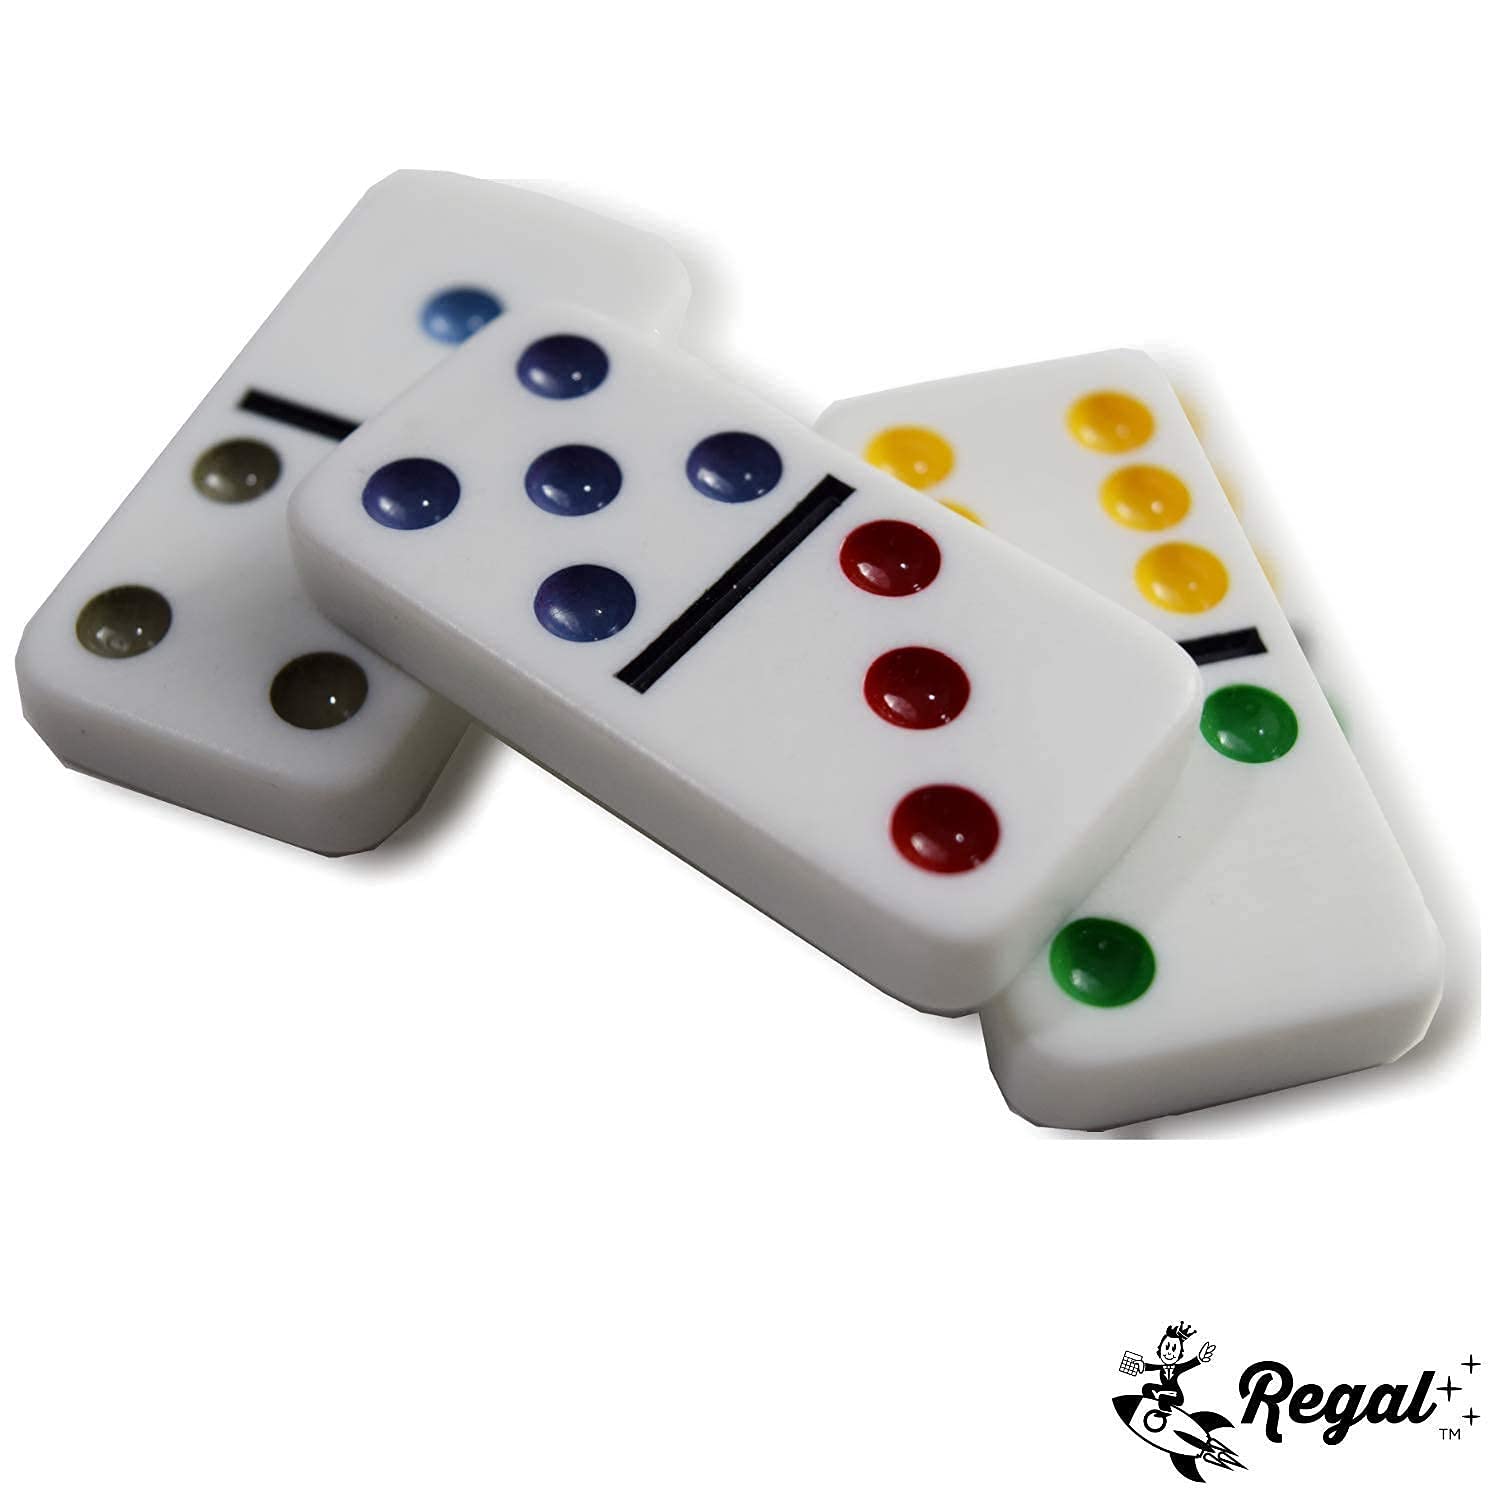 Regal Games - Double 6 Dominoes Set with Colored Dots, 28 Tiles and Collector's Tin